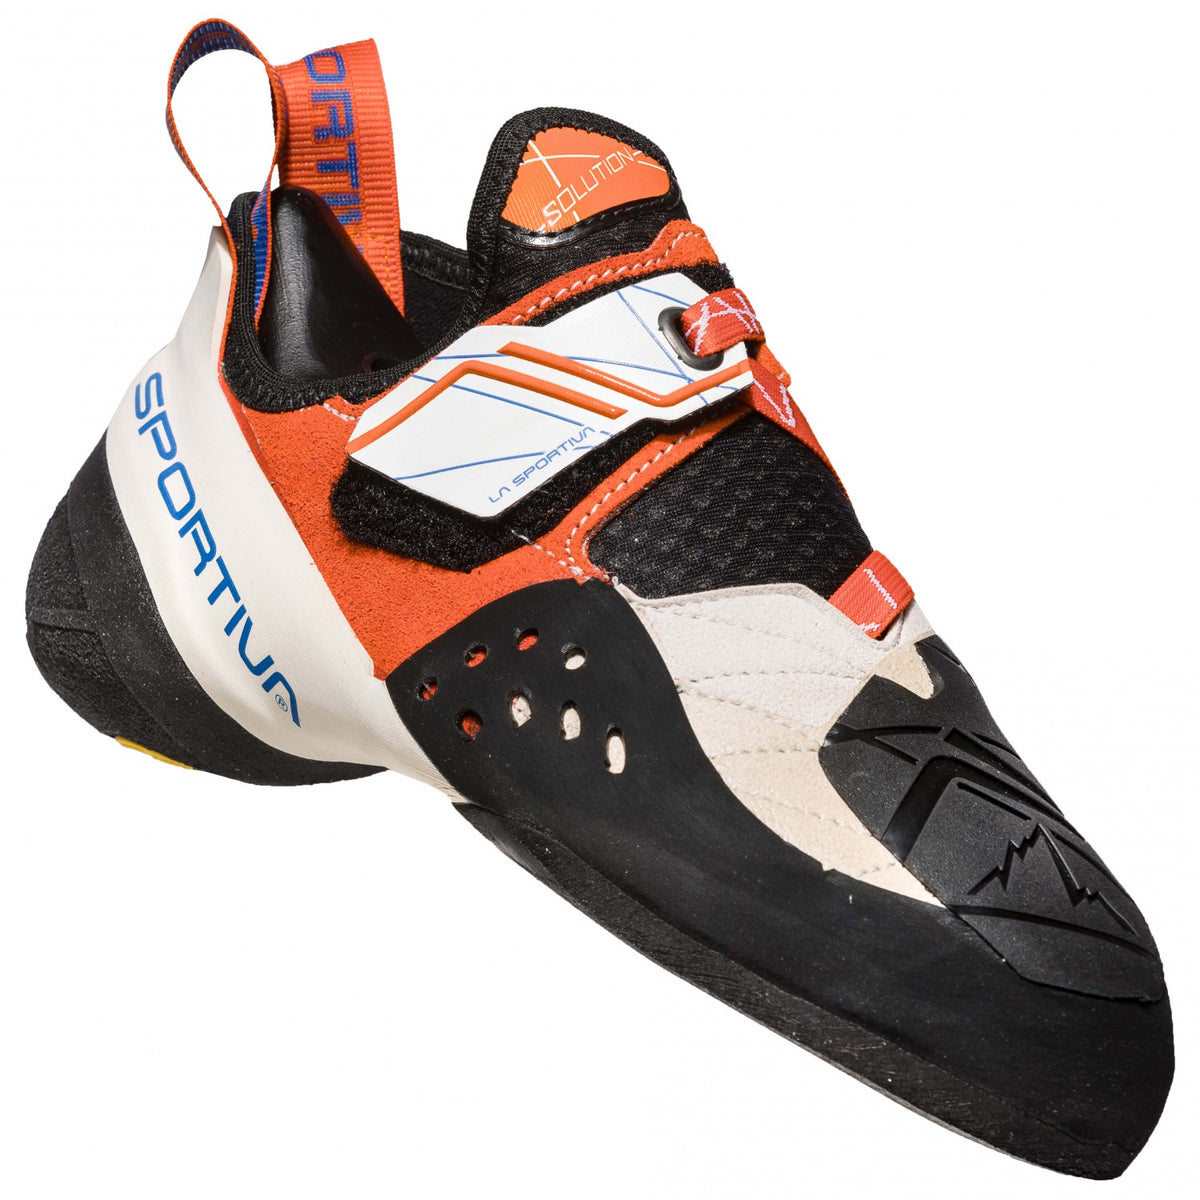 La Sportiva Solution Women&#39;s climbing shoe, in black, White and orange colour as seen from the side